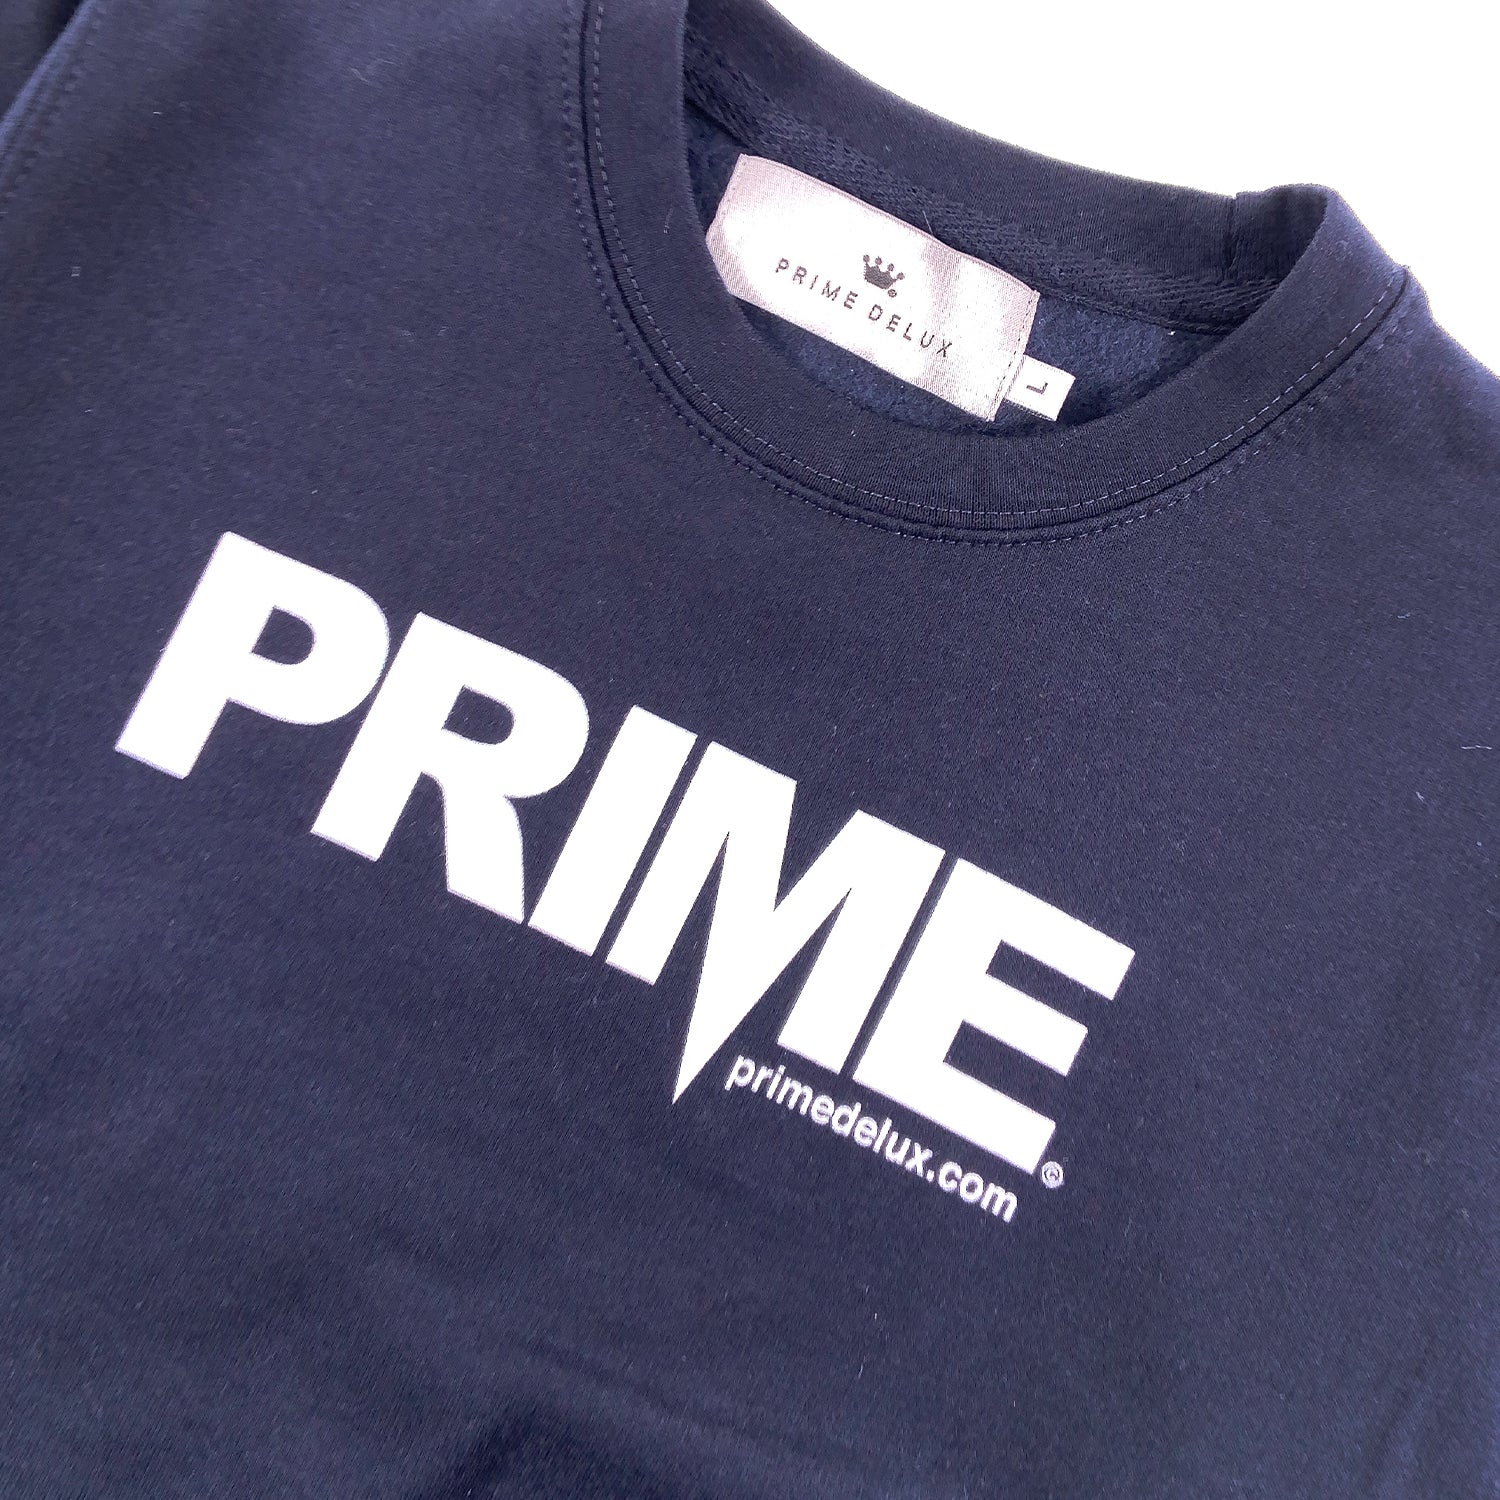 PRIME DELUX YOUTHS OG PREMIUM CREW SWEAT - NEW FRENCH NAVY / WHITE - Prime Delux Store